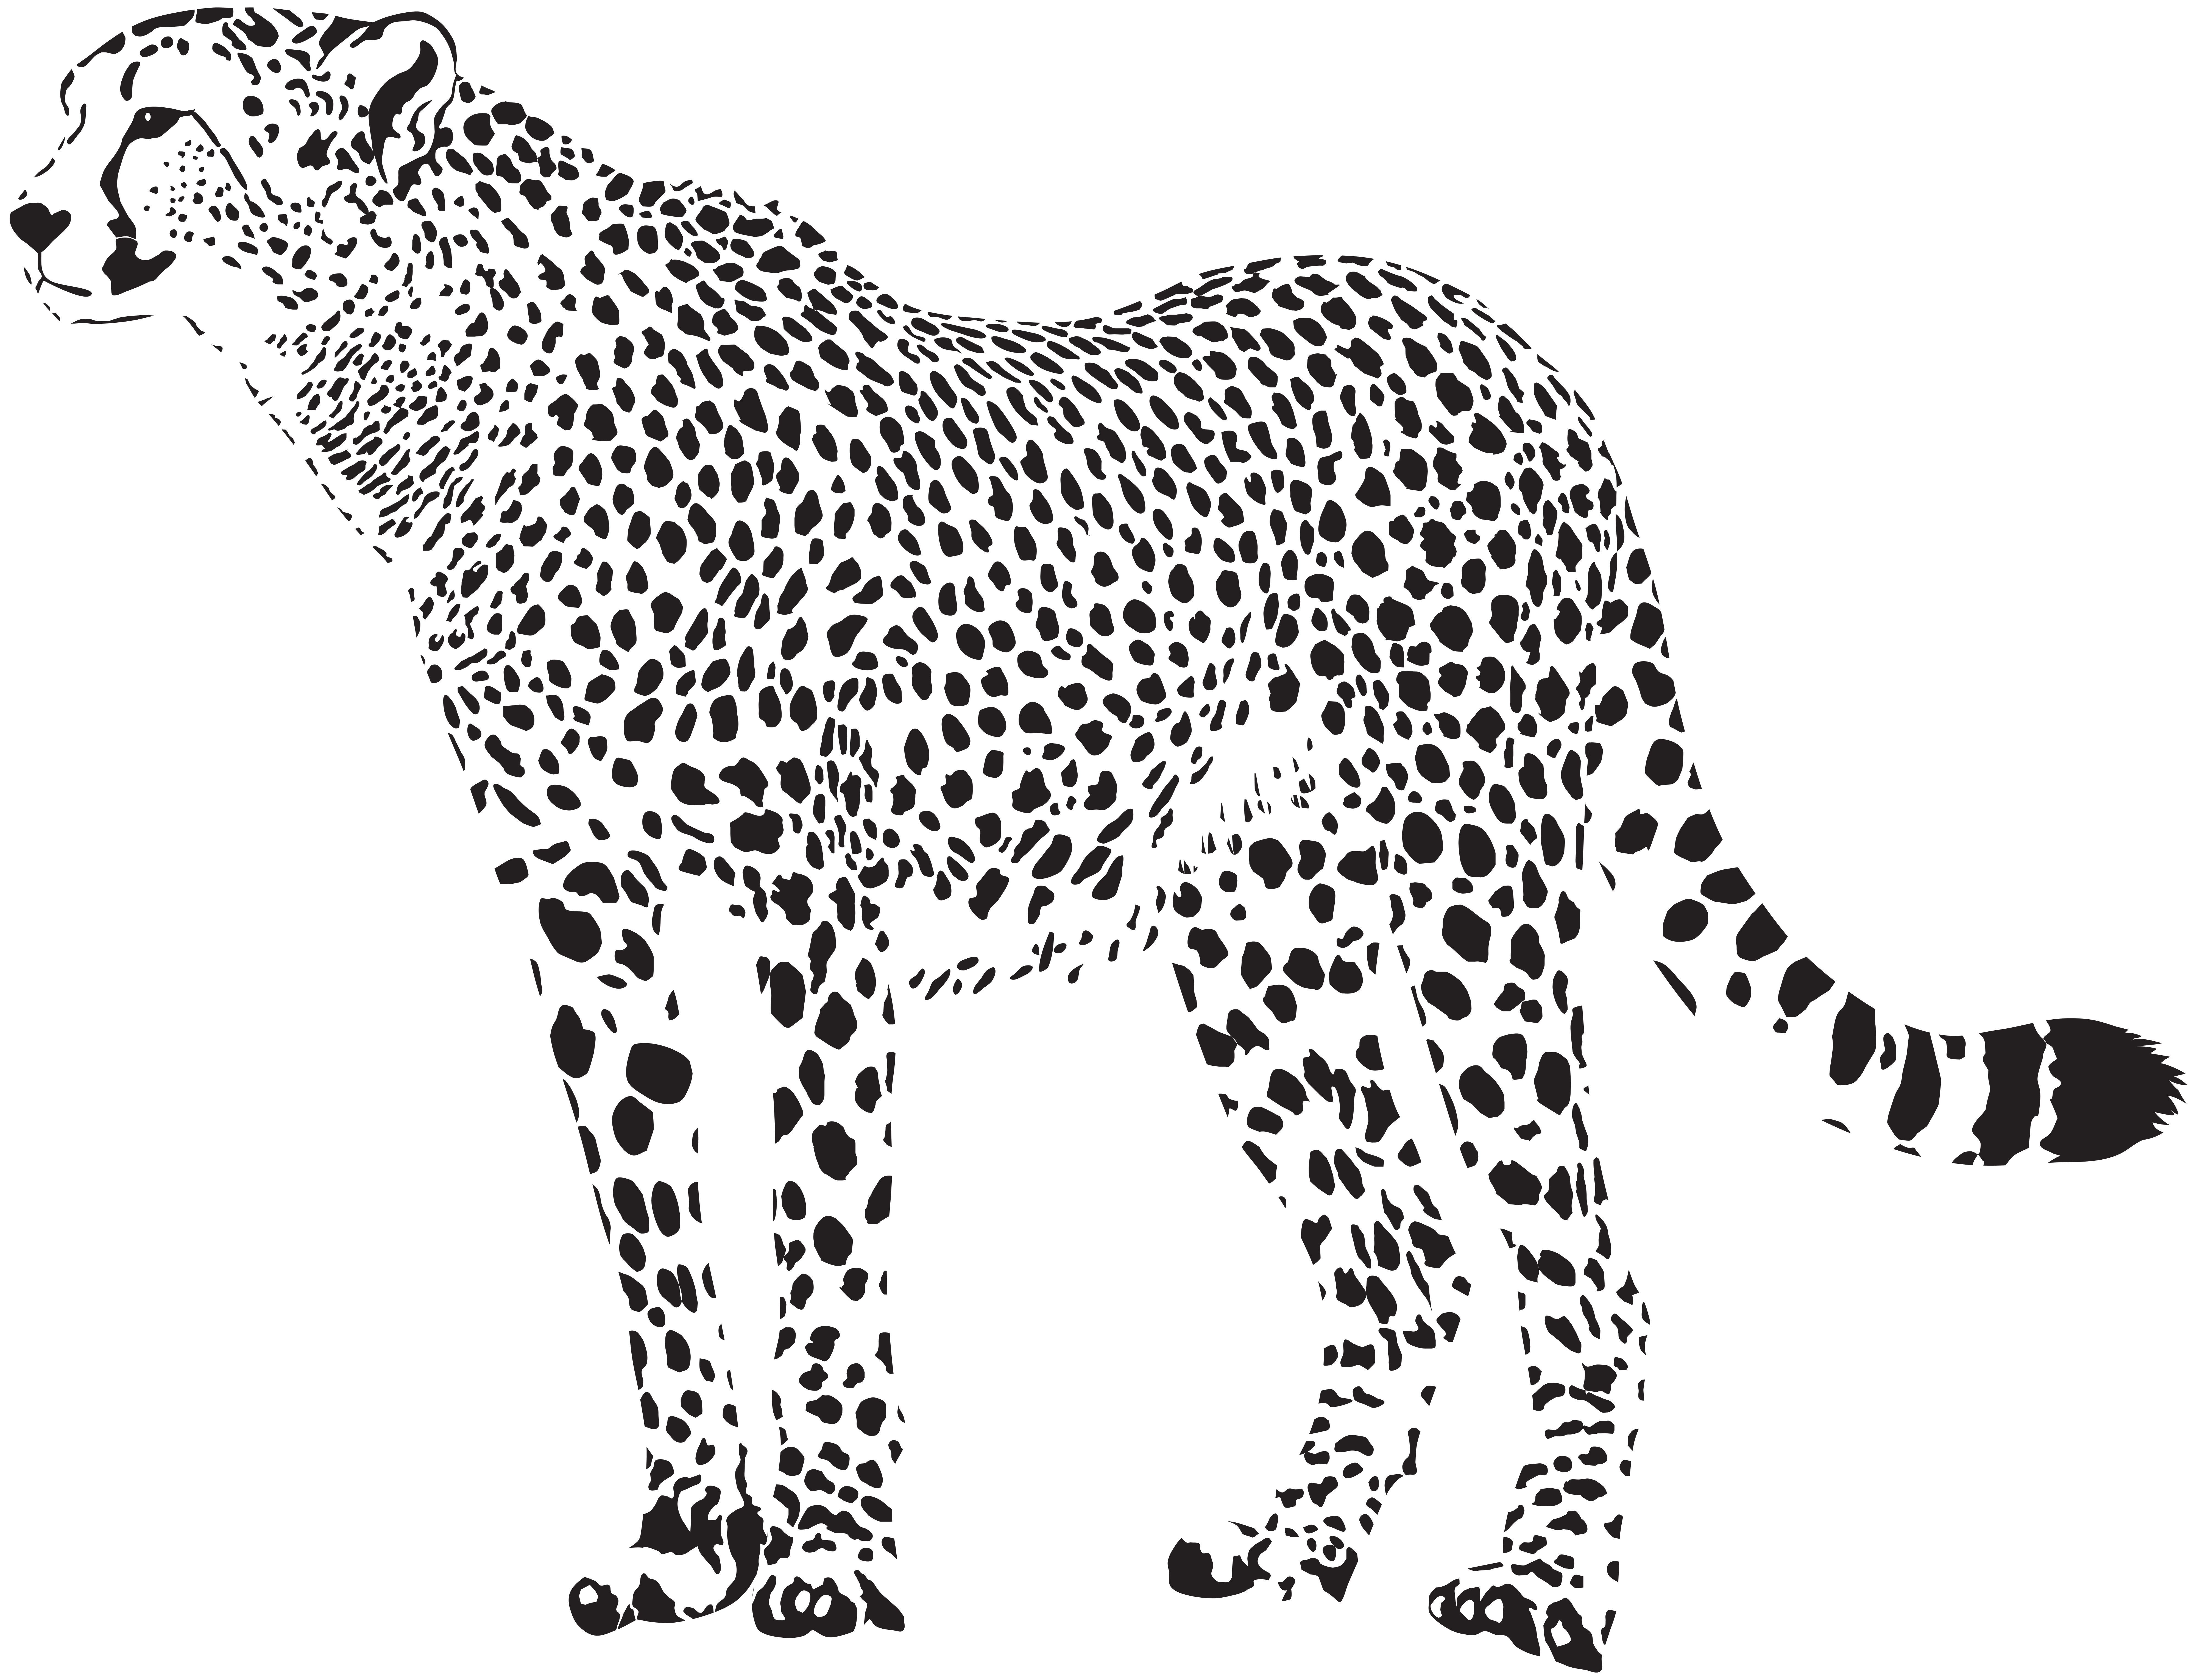 Free Cheetah Silhouette Cliparts, Download Free Clip Art